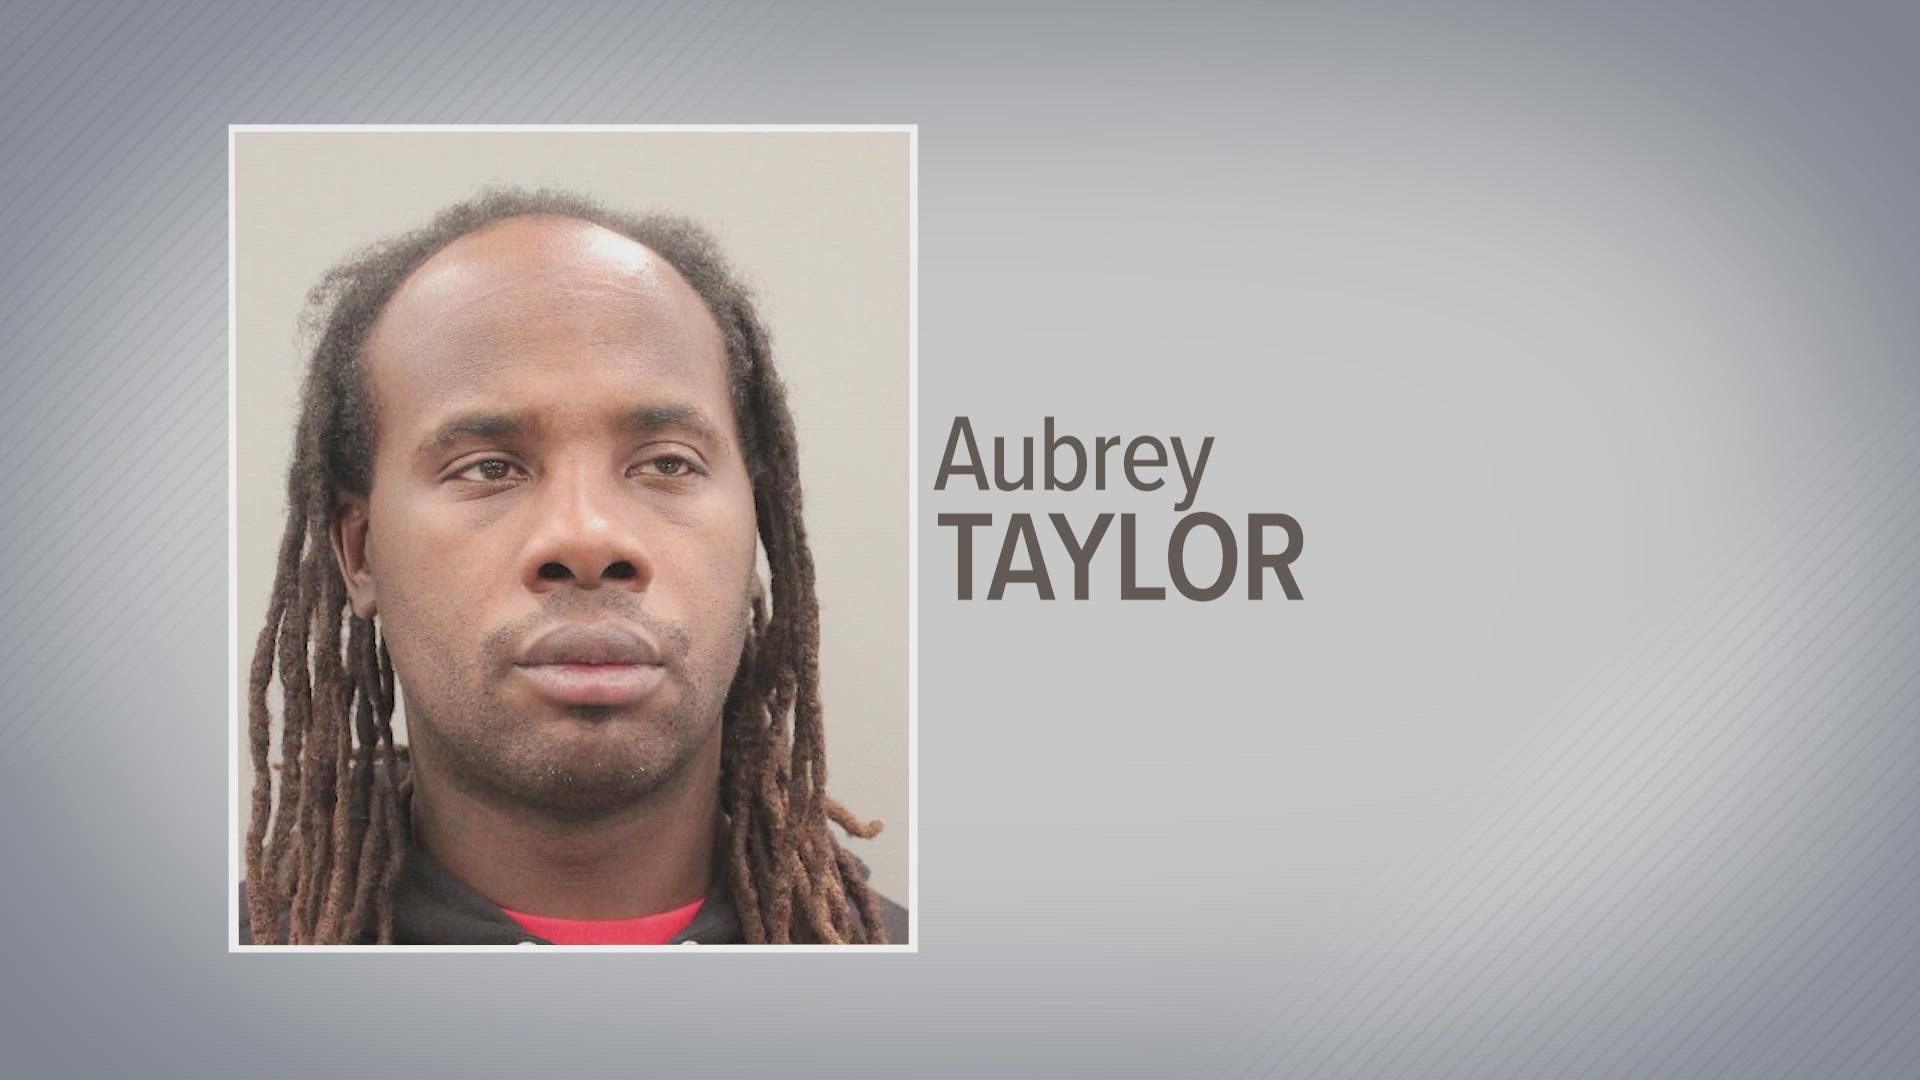 According to court documents, Aubrey Andre Taylor, 42, was arrested within days of his release last week after he threatened the same victim.